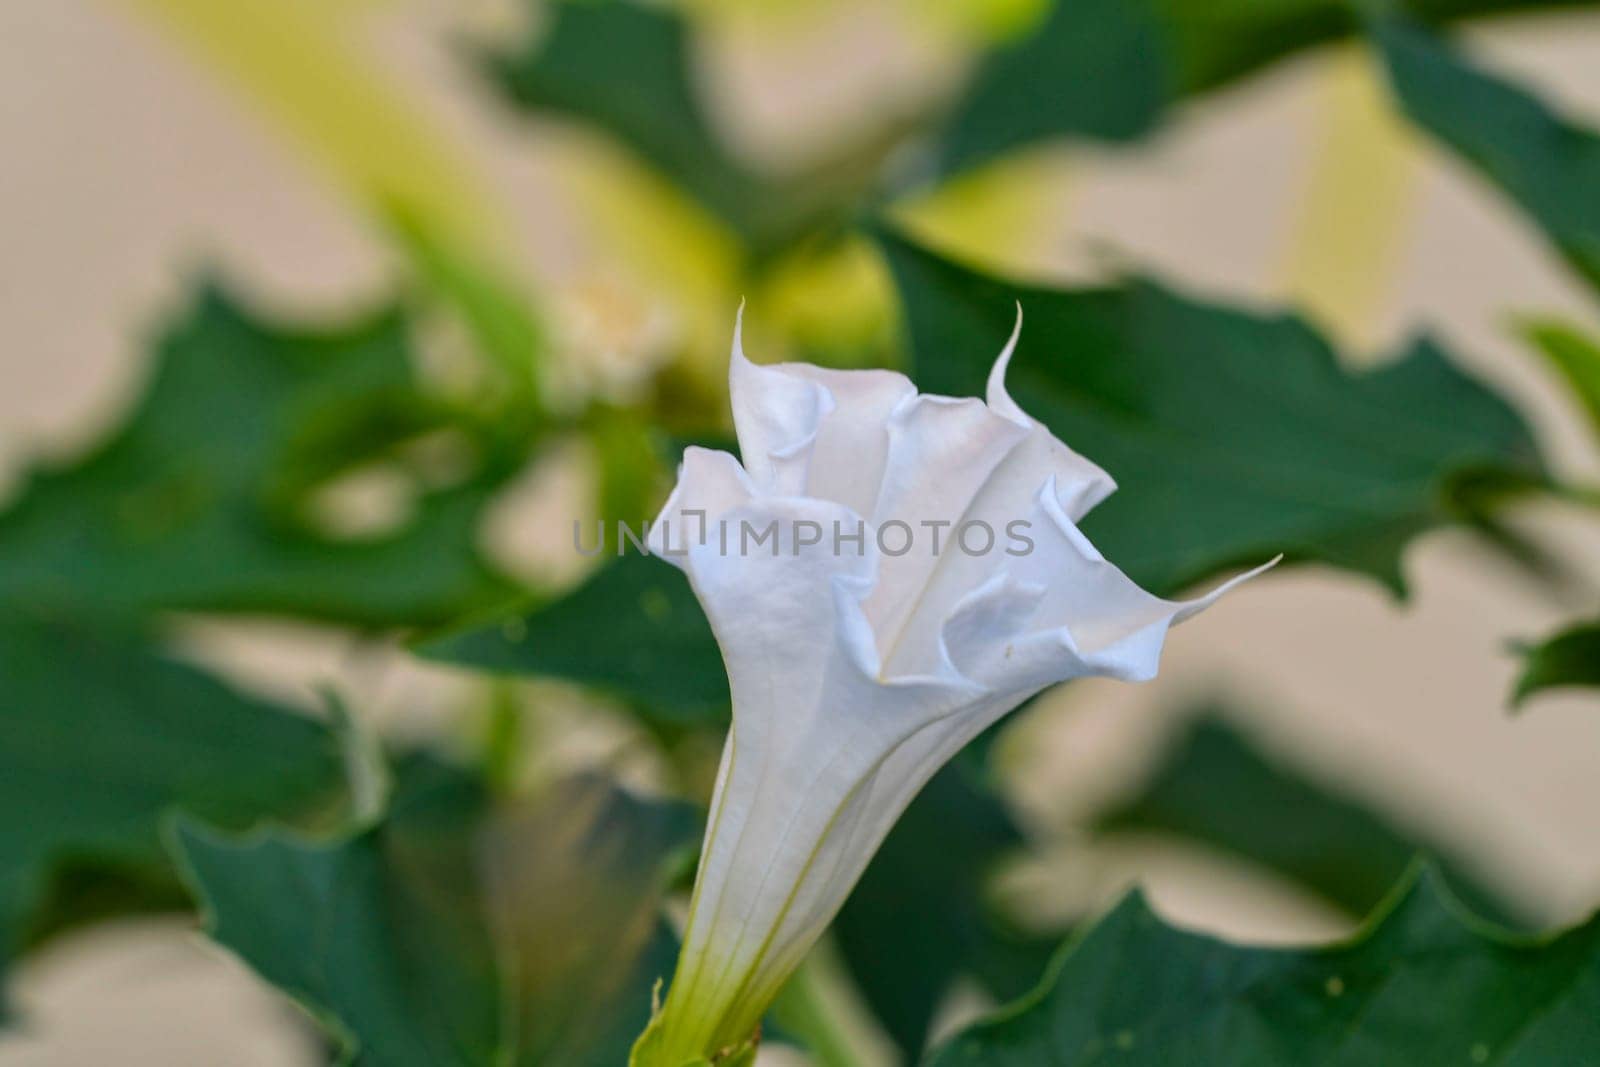 Datura stramonium, known by the common names thorn apple, jimsonweed jimson weed, devil's snare, or devil's trumpet, is a poisonous flowering plant of the nightshade family Solanaceae. It is a species belonging to the Datura genus and Daturae tribe. Its likely origin was in Central America, and it has been introduced in many world regions. It is an aggressive invasive weed in temperate climates and tropical climates across the world by roman_nerud